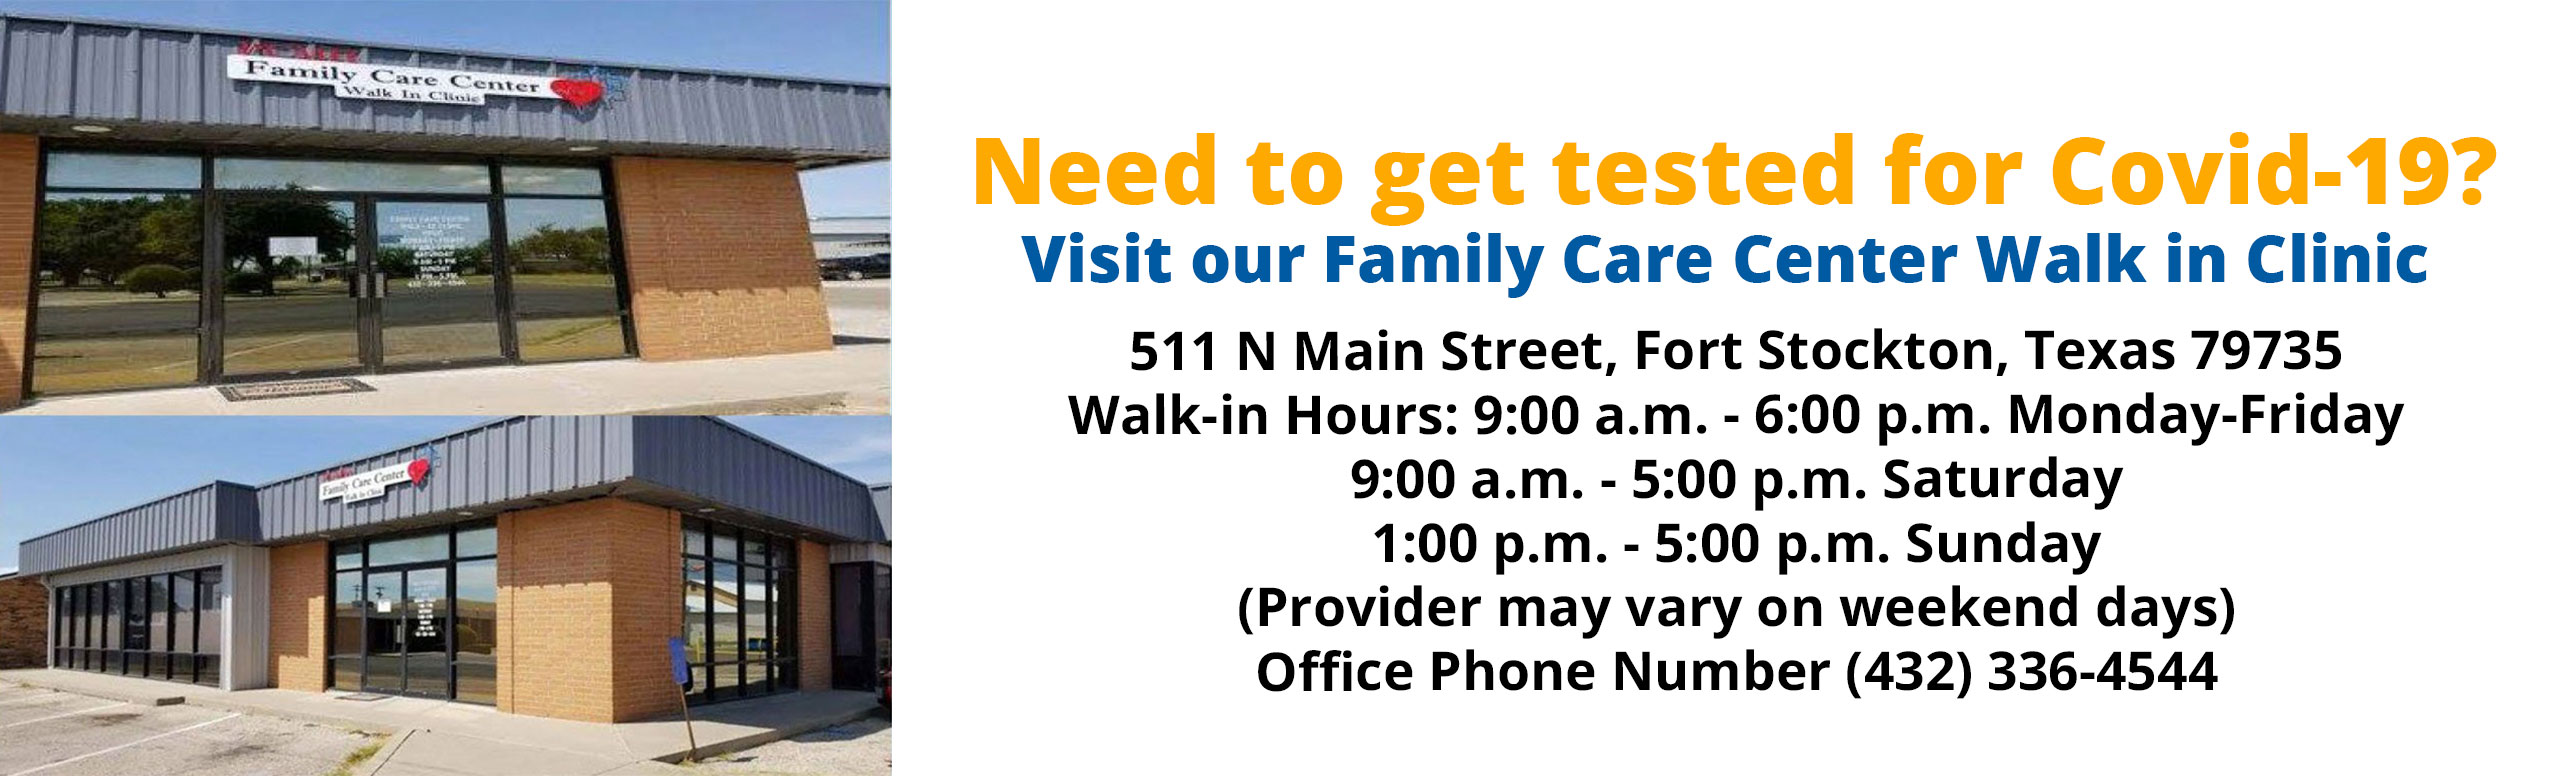 Need to get tested for Covid-19?
Visit our Family Care Center Walk in Clinic

511 N Main Street, Fort Stockton, Texas 79735
Walk-in Hours: 9:00 a.m/ - 6:00 p.m.
Monday-Friday 
9:00 a.m. -  6:00 p.m. Sunday
(Provider may vary on weekend days)
Office Phone Number (432)336-4544